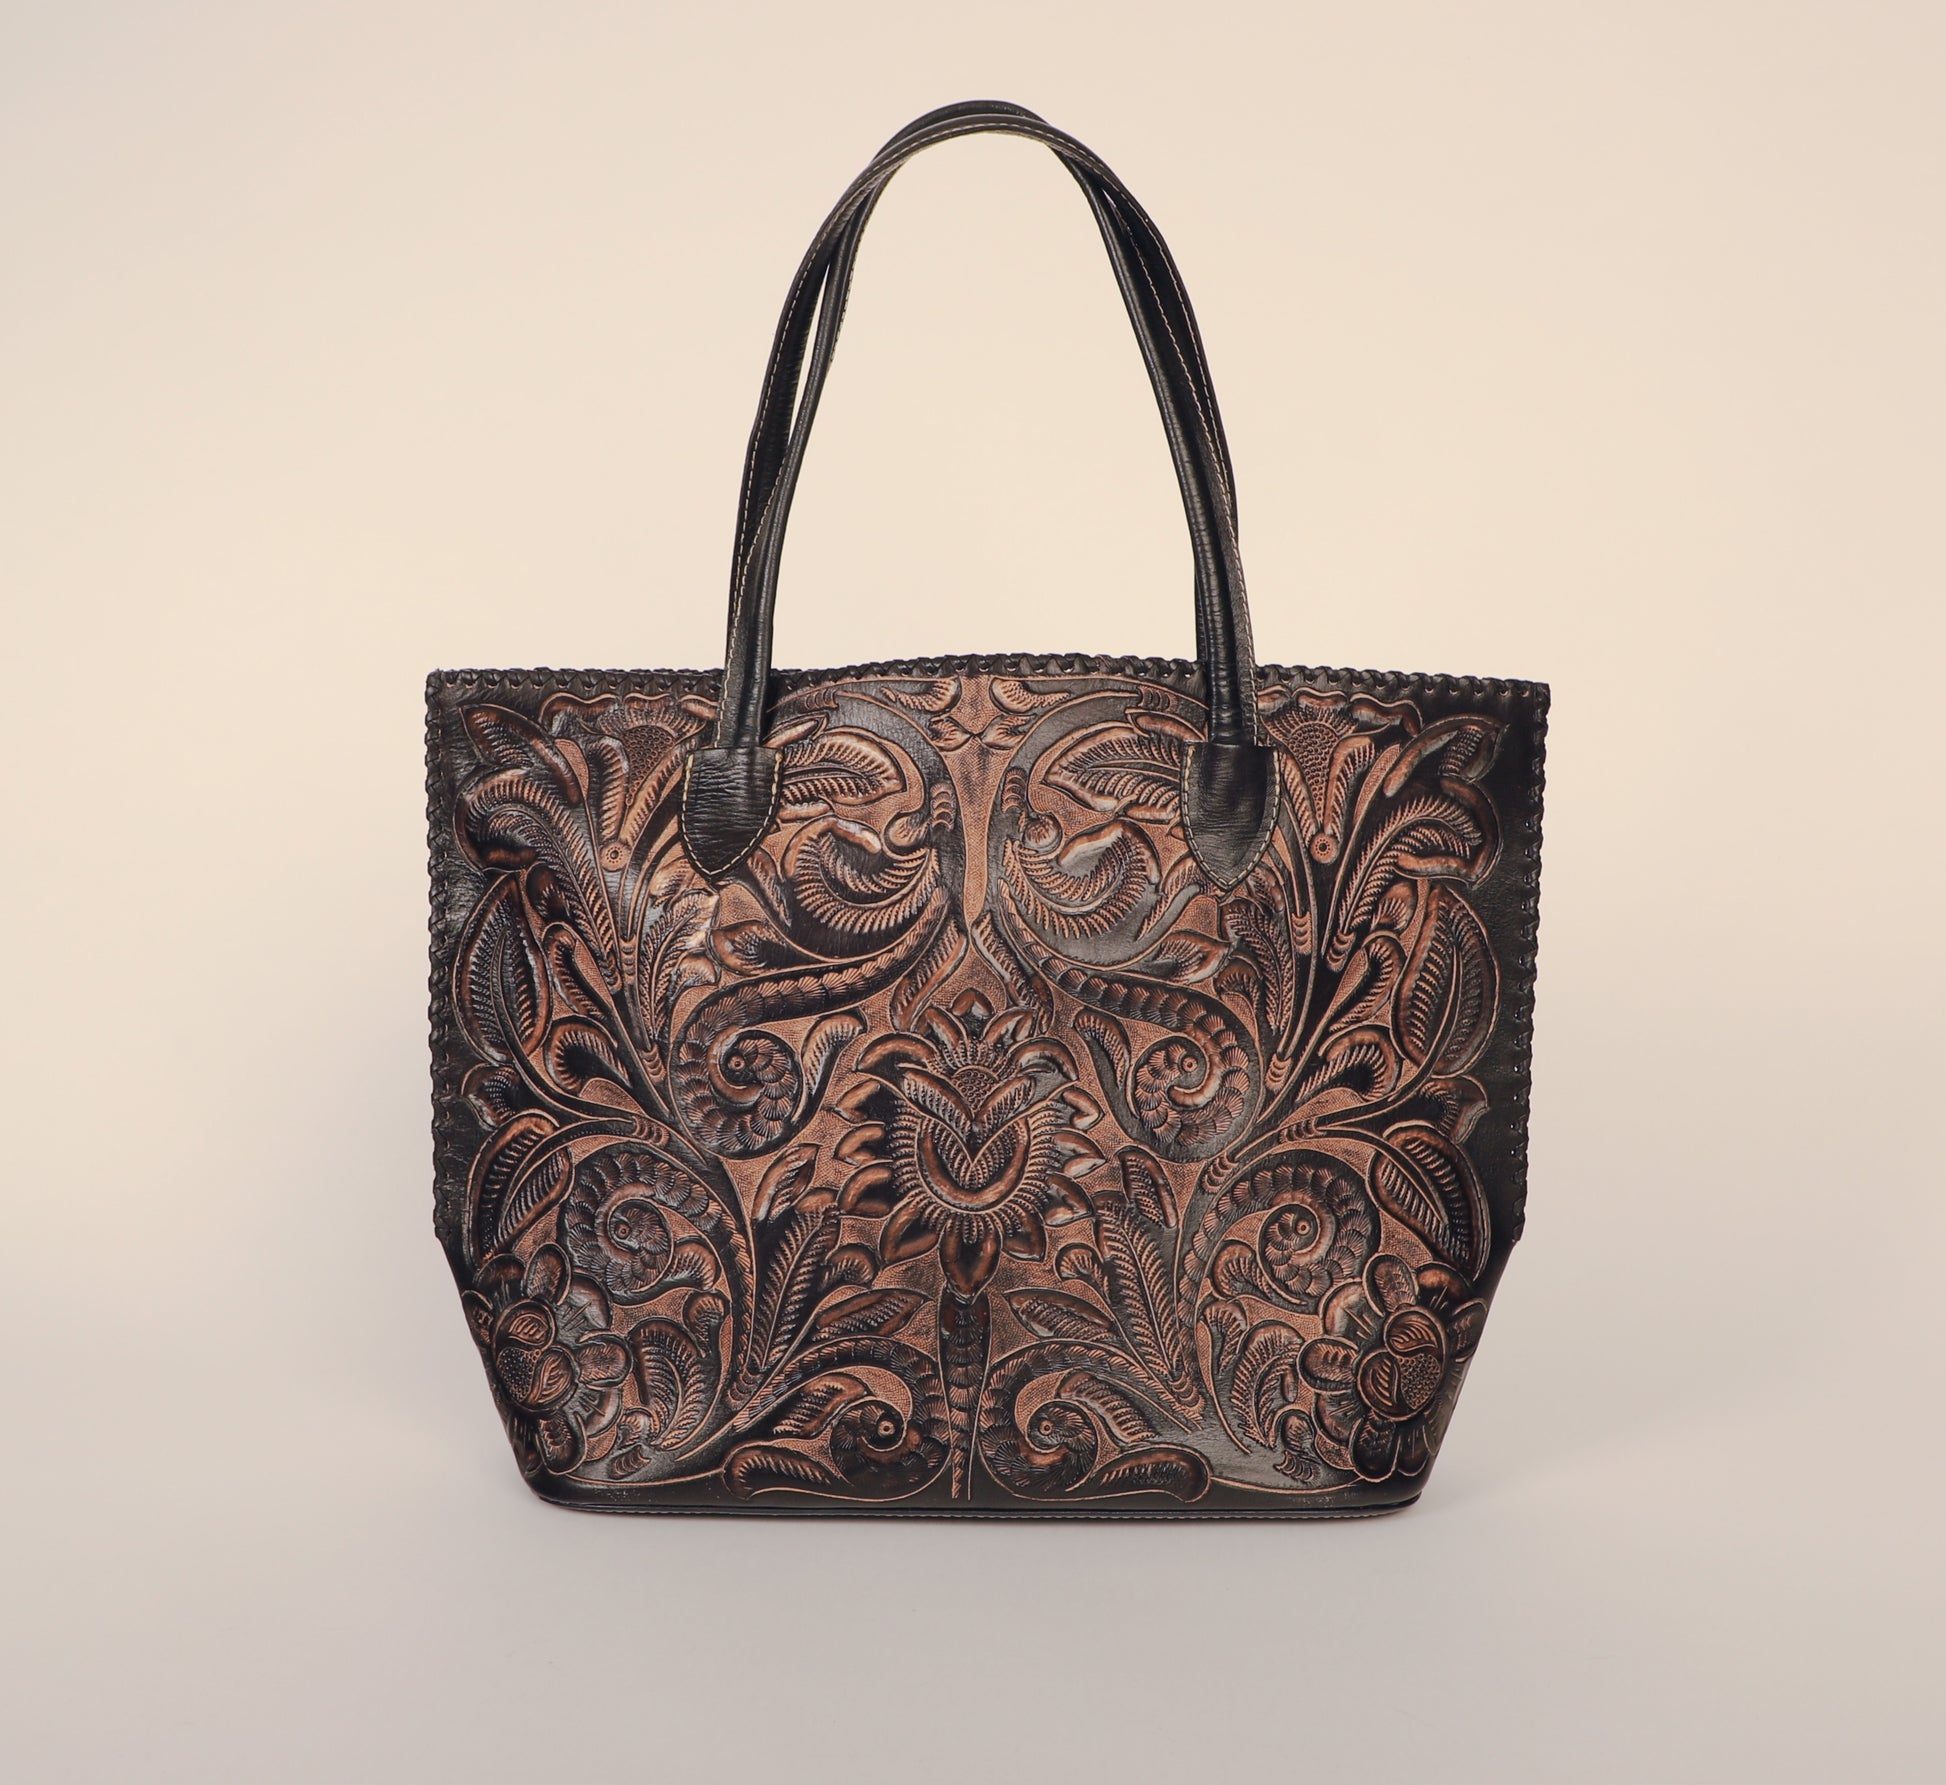 Over-sized authentic leather tote bag with traditional Mexican design etched on both sides. Fully lined with suede.  Front view with handles, dual colored black and brown.